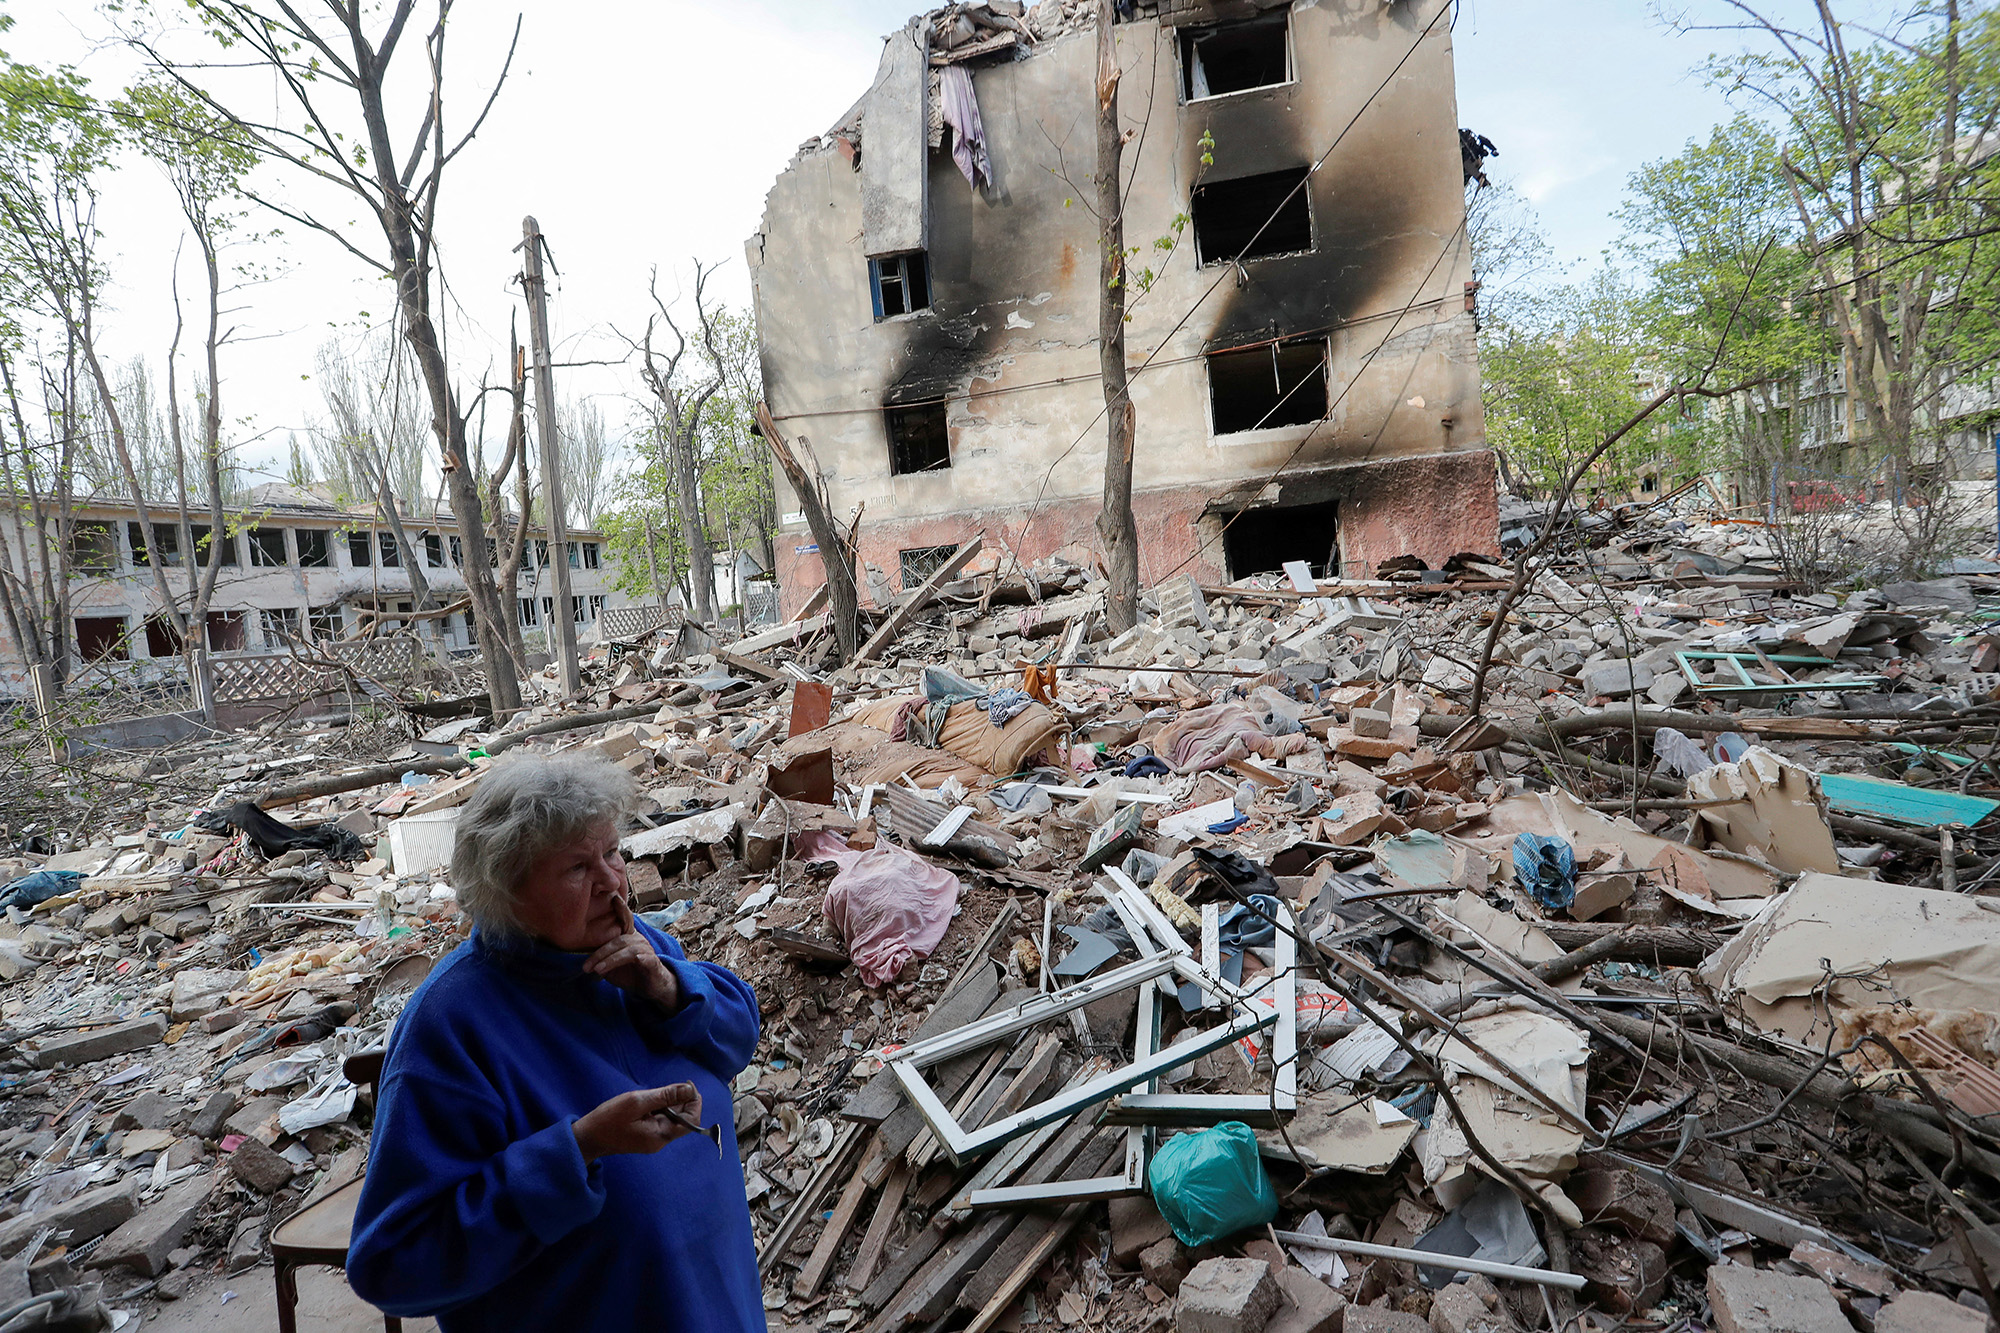 Natalya Kalugina, 64, stands in a courtyard near a block of destroyed apartment buildings in Mariupol, Ukraine on April 29.